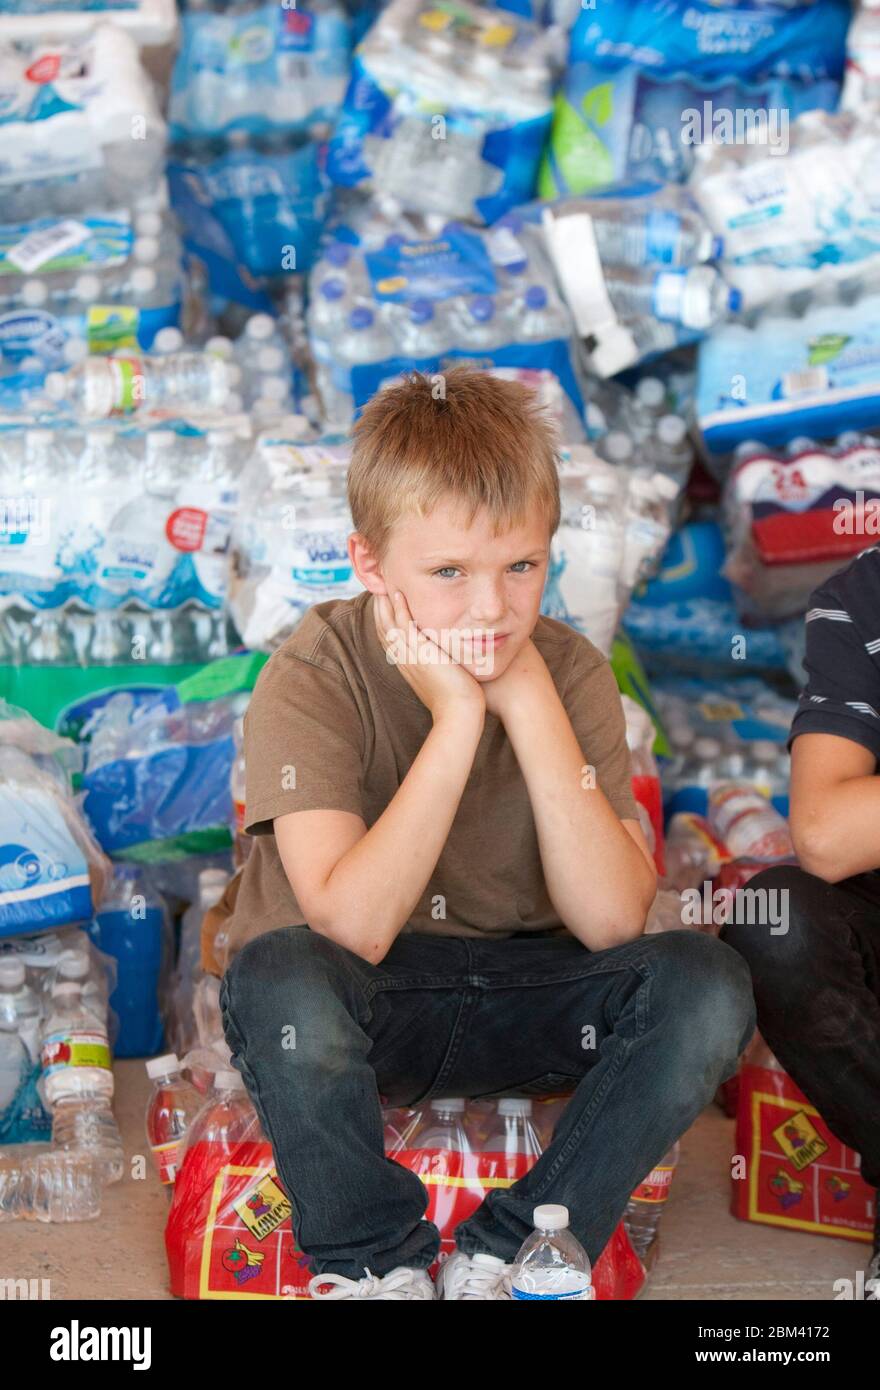 Young residents of Bastrop, Texas at the Convention Center sit if front of donated bottled water after massive wildflowers swept the area in early September, 2011  September 9, 2011.  ©Marjorie Kamys Cotera / Daemmrich Photos Stock Photo